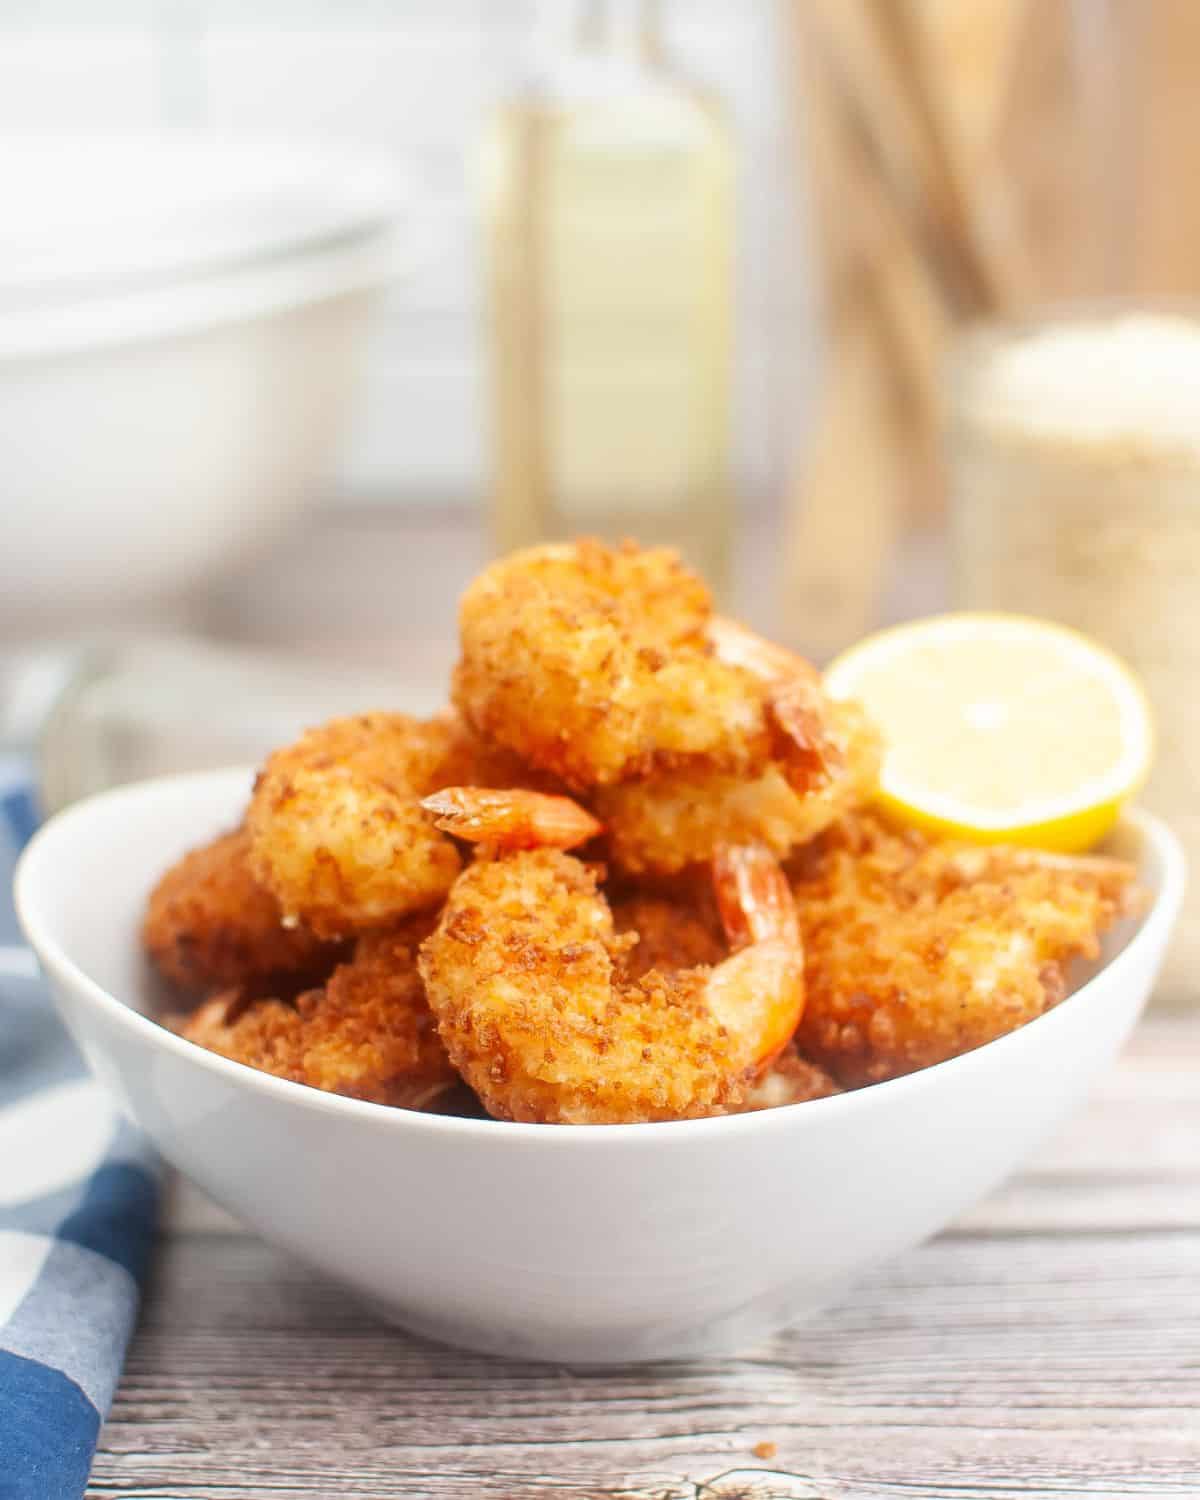 A bowl of Panko fried bread crumbs with a lemon wedge.